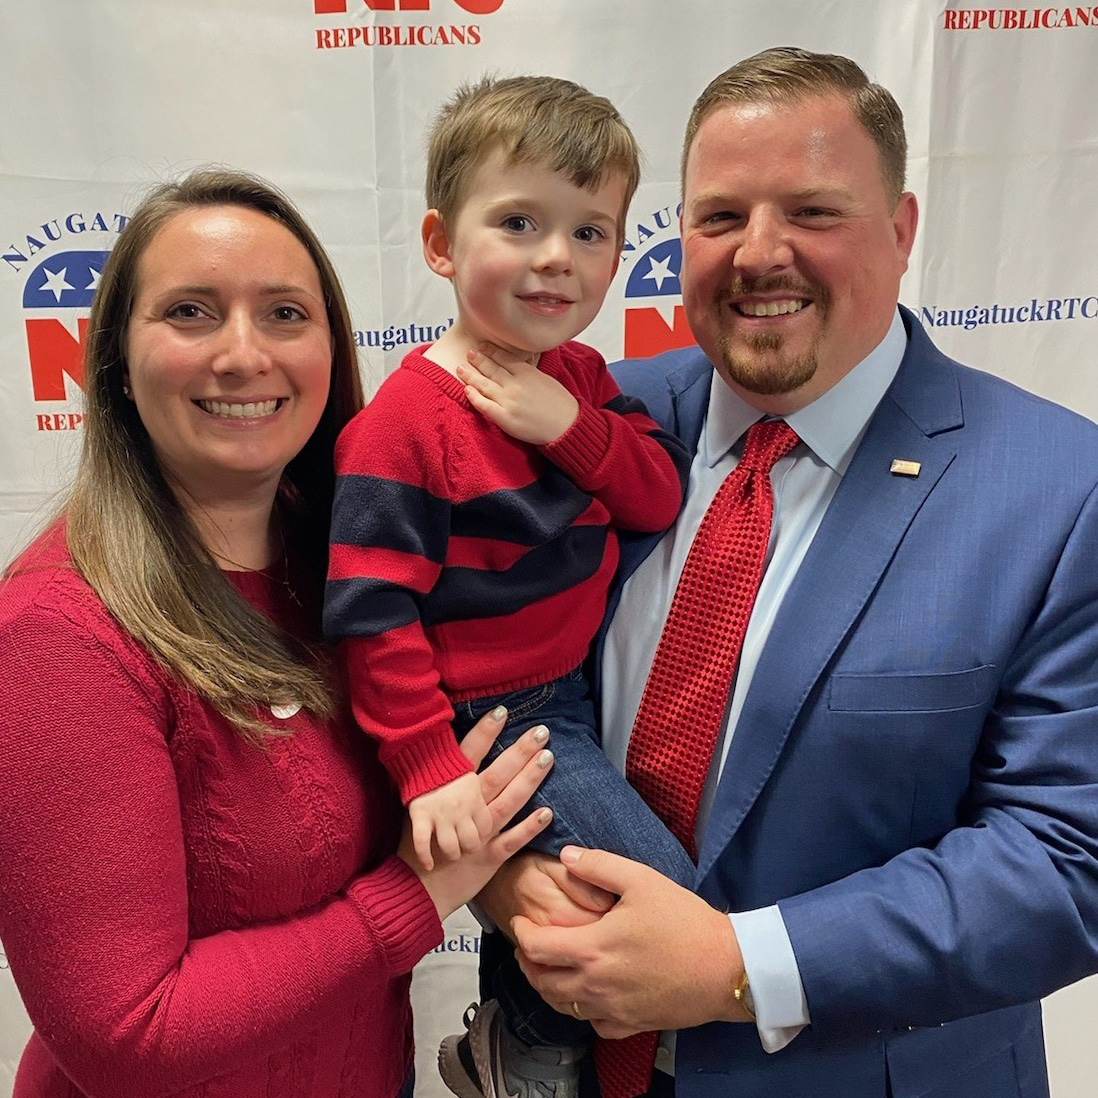 Seth Bronko '11 elected as state rep stands in front of republican banner with wife and child